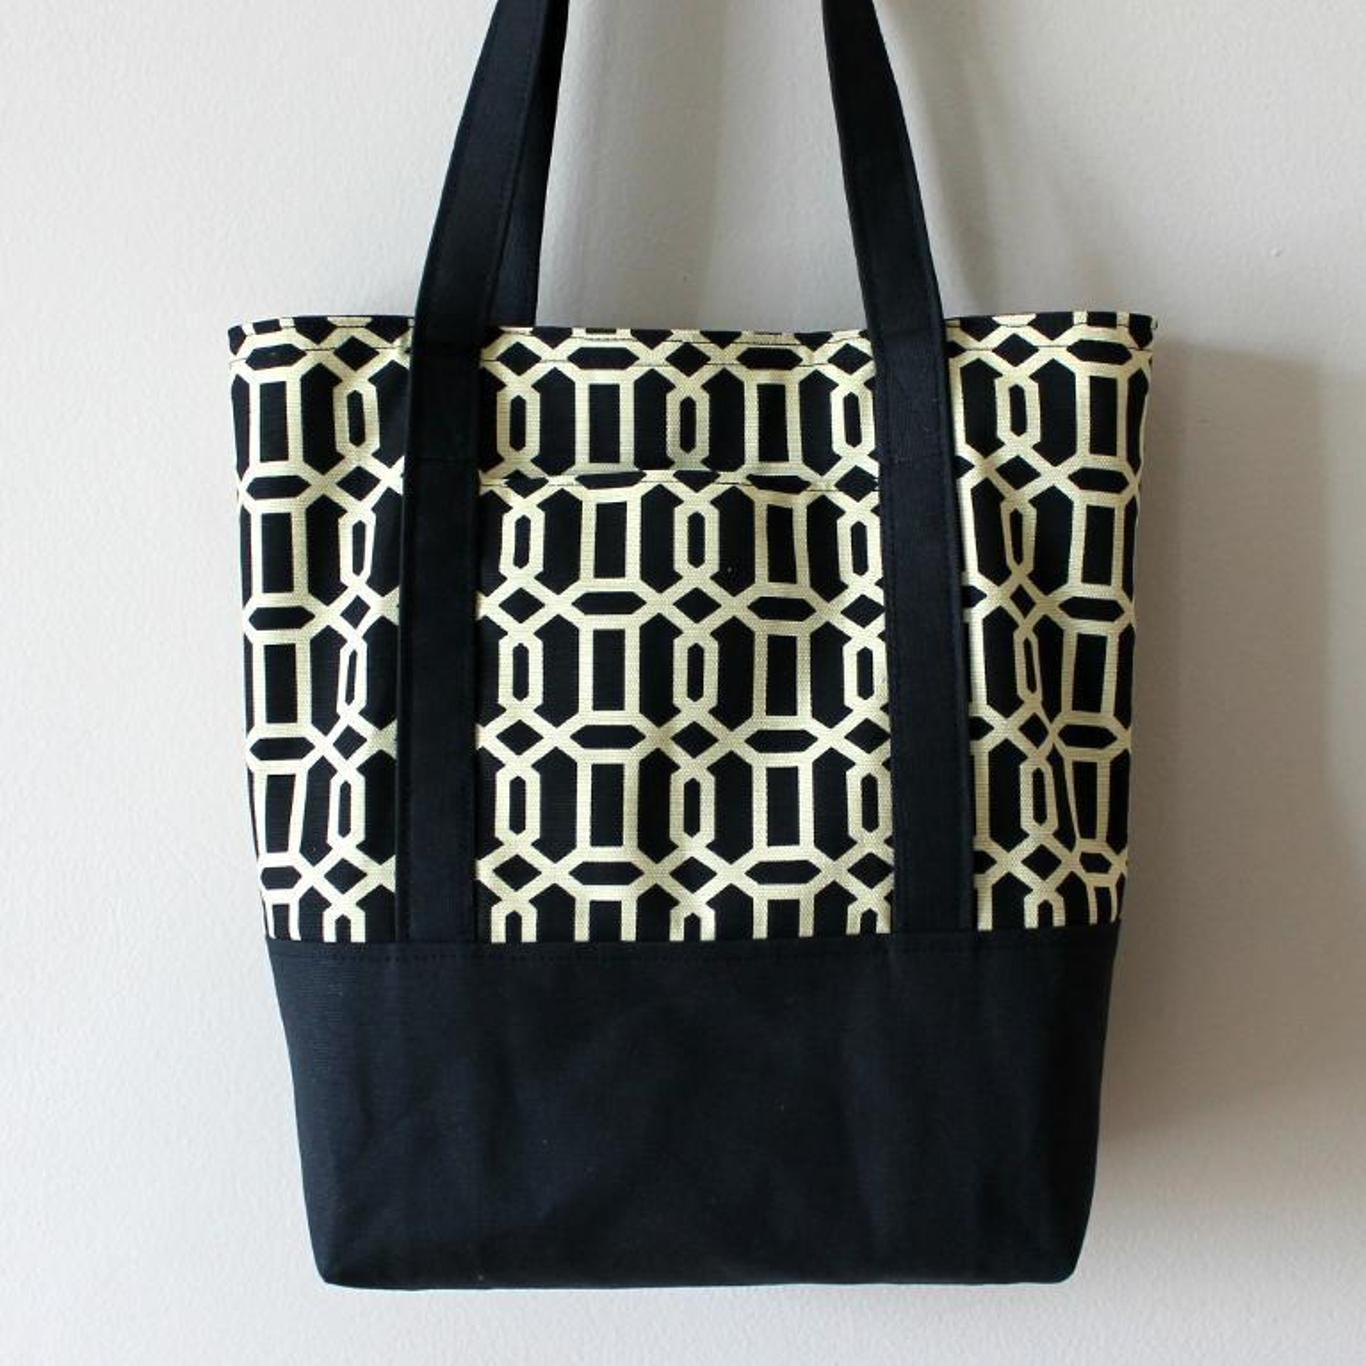 FREE PATTERN ALERT 20 Handbags and purses - On the Cutting Floor: Printable pdf sewing patterns ...